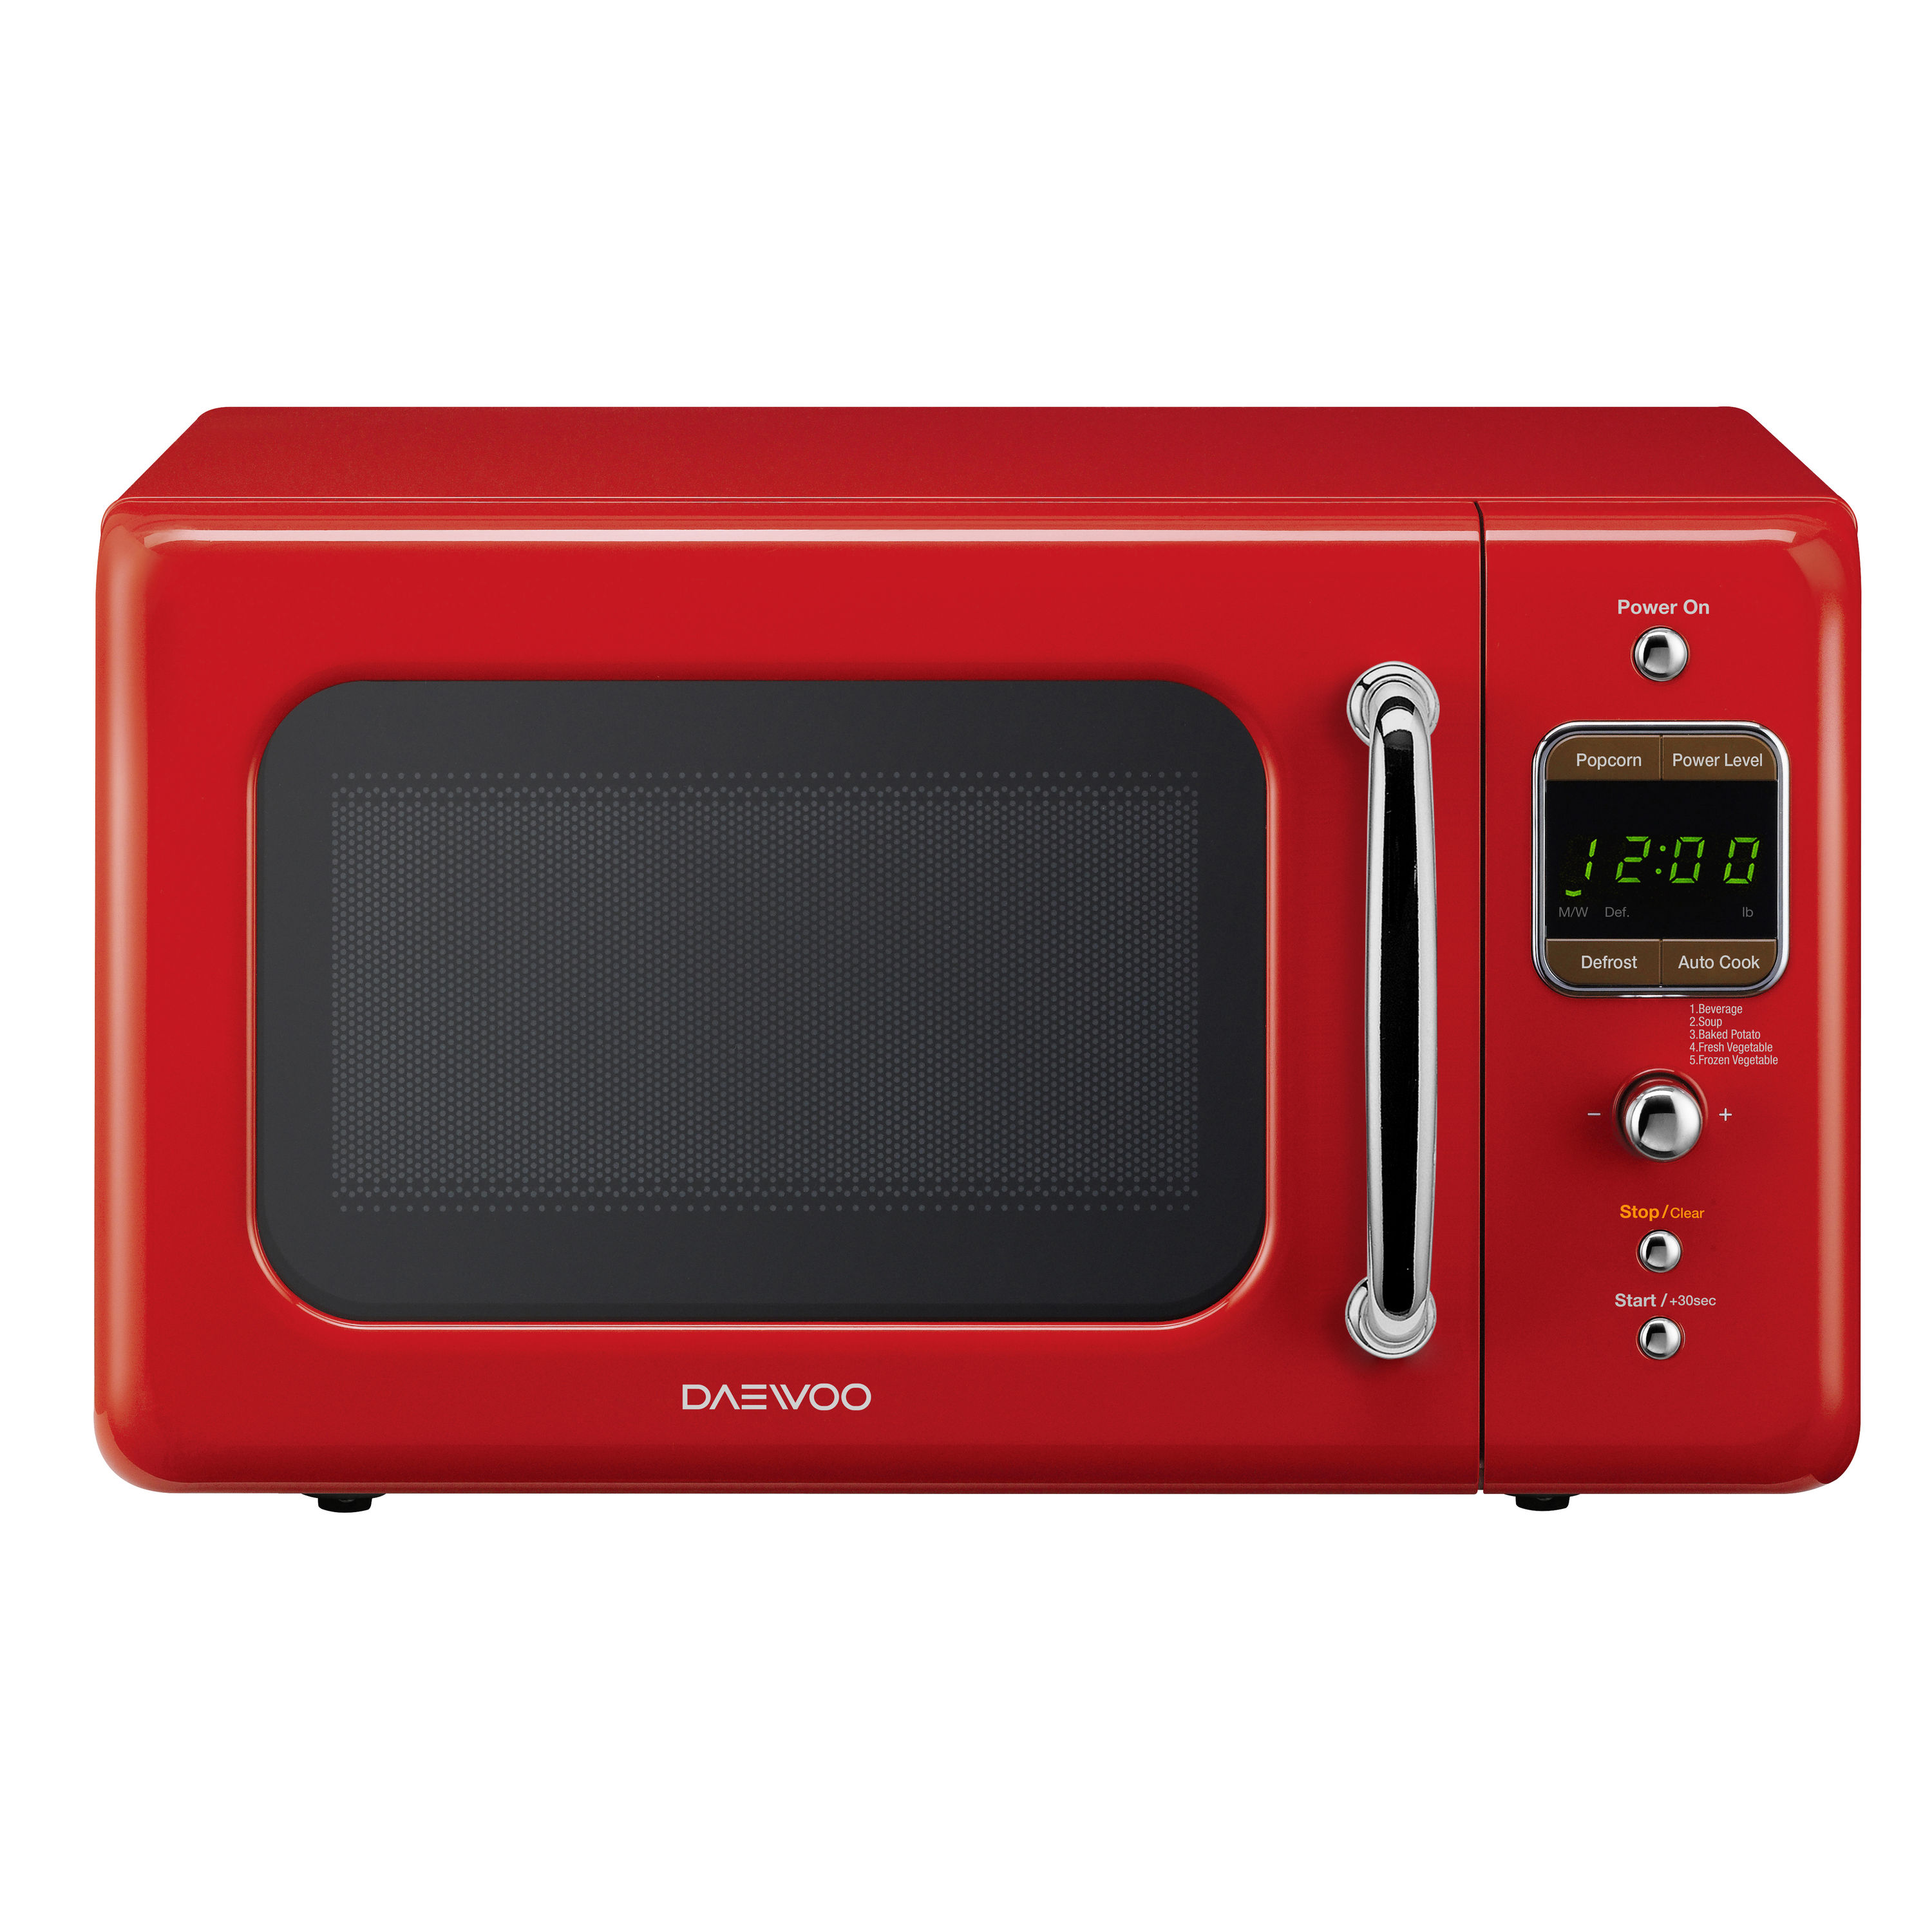 230 volt microwave for export: Muave' small microwave 17.3 w x